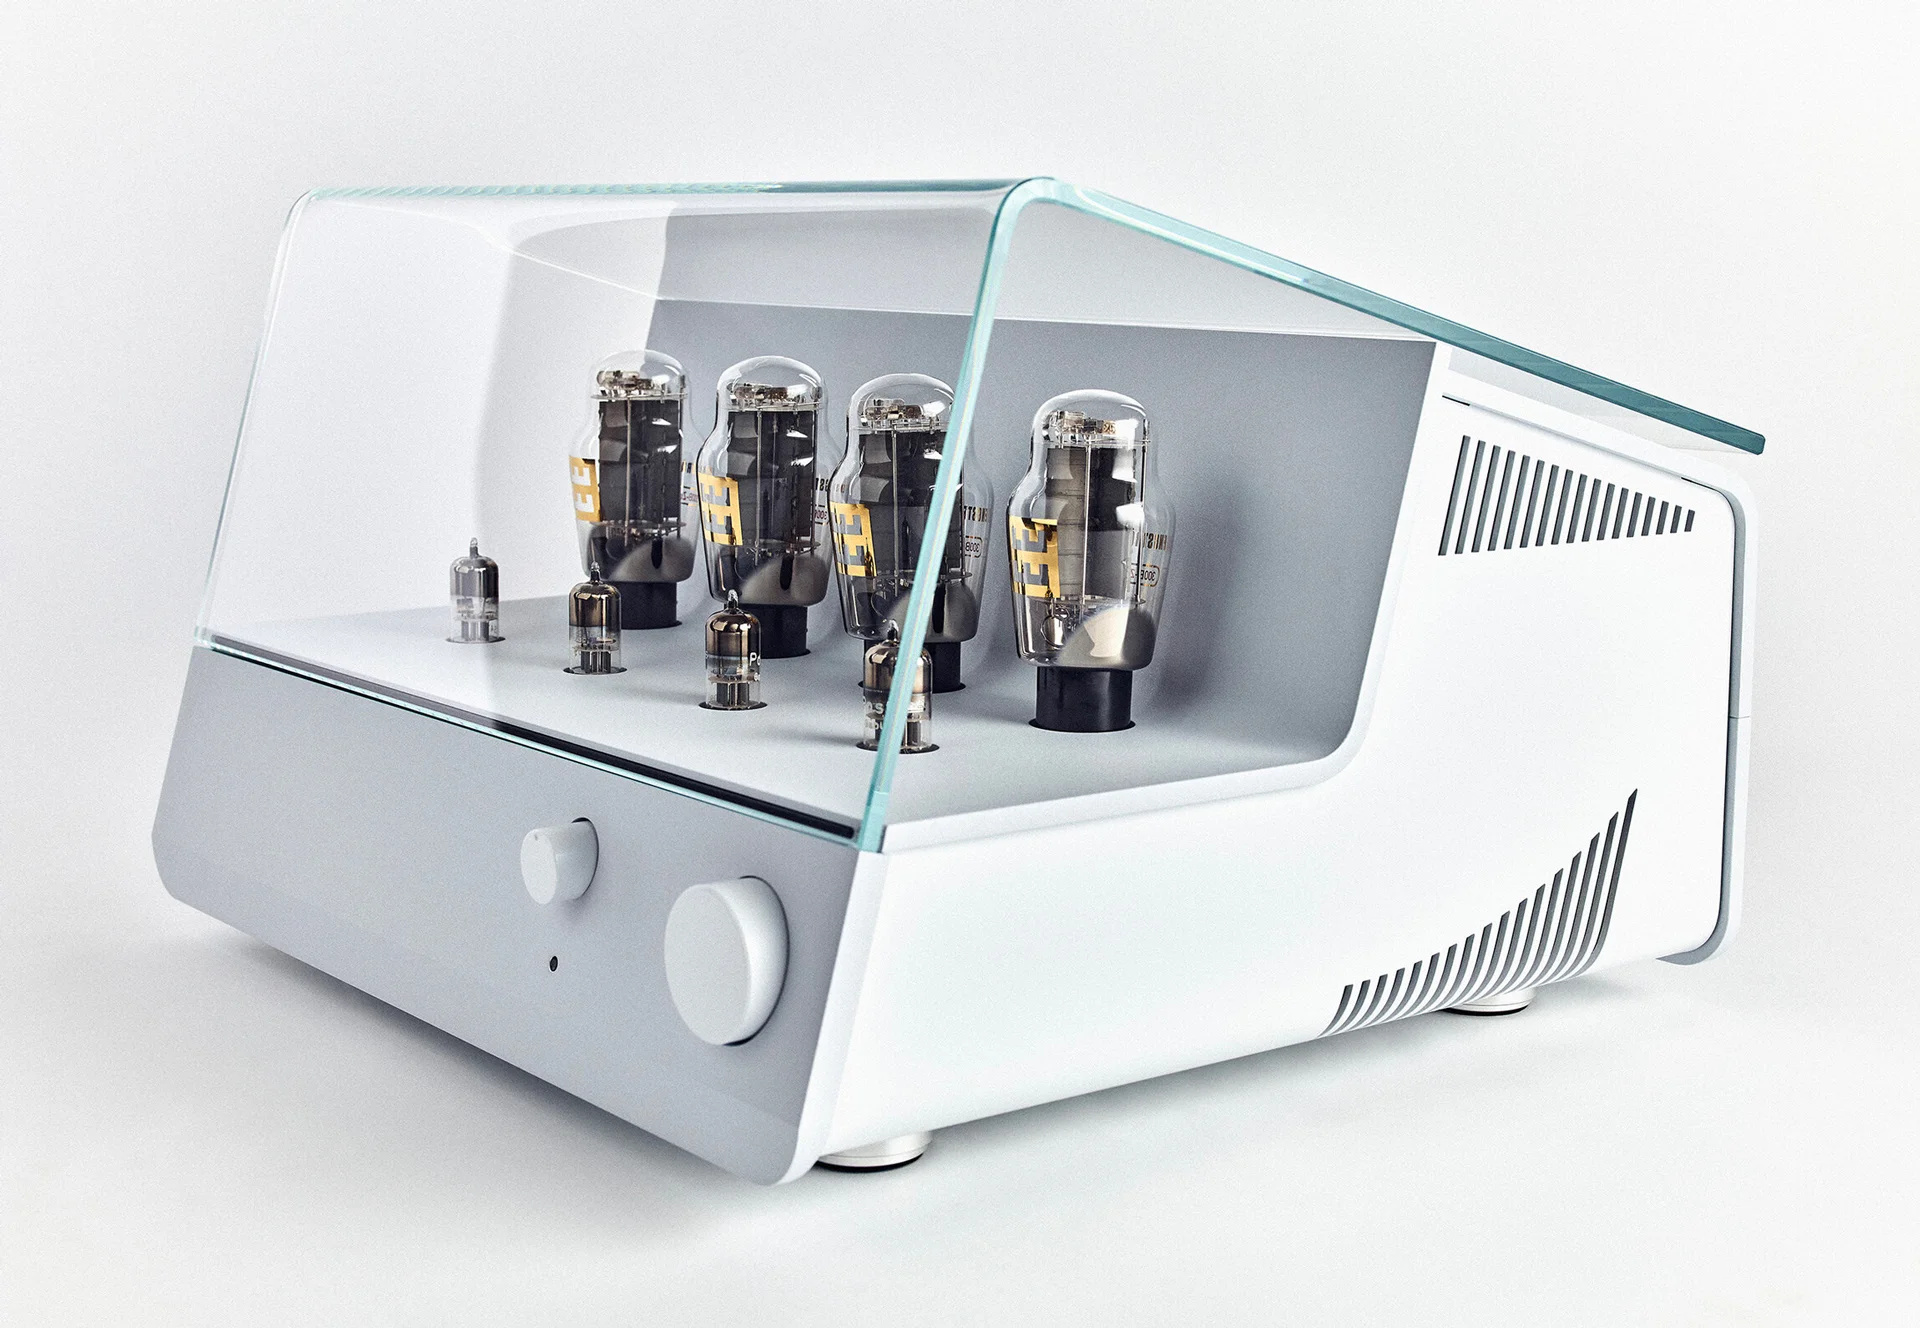 The Engstrom ARNE integrated amplifier pictured in white with clear cover.